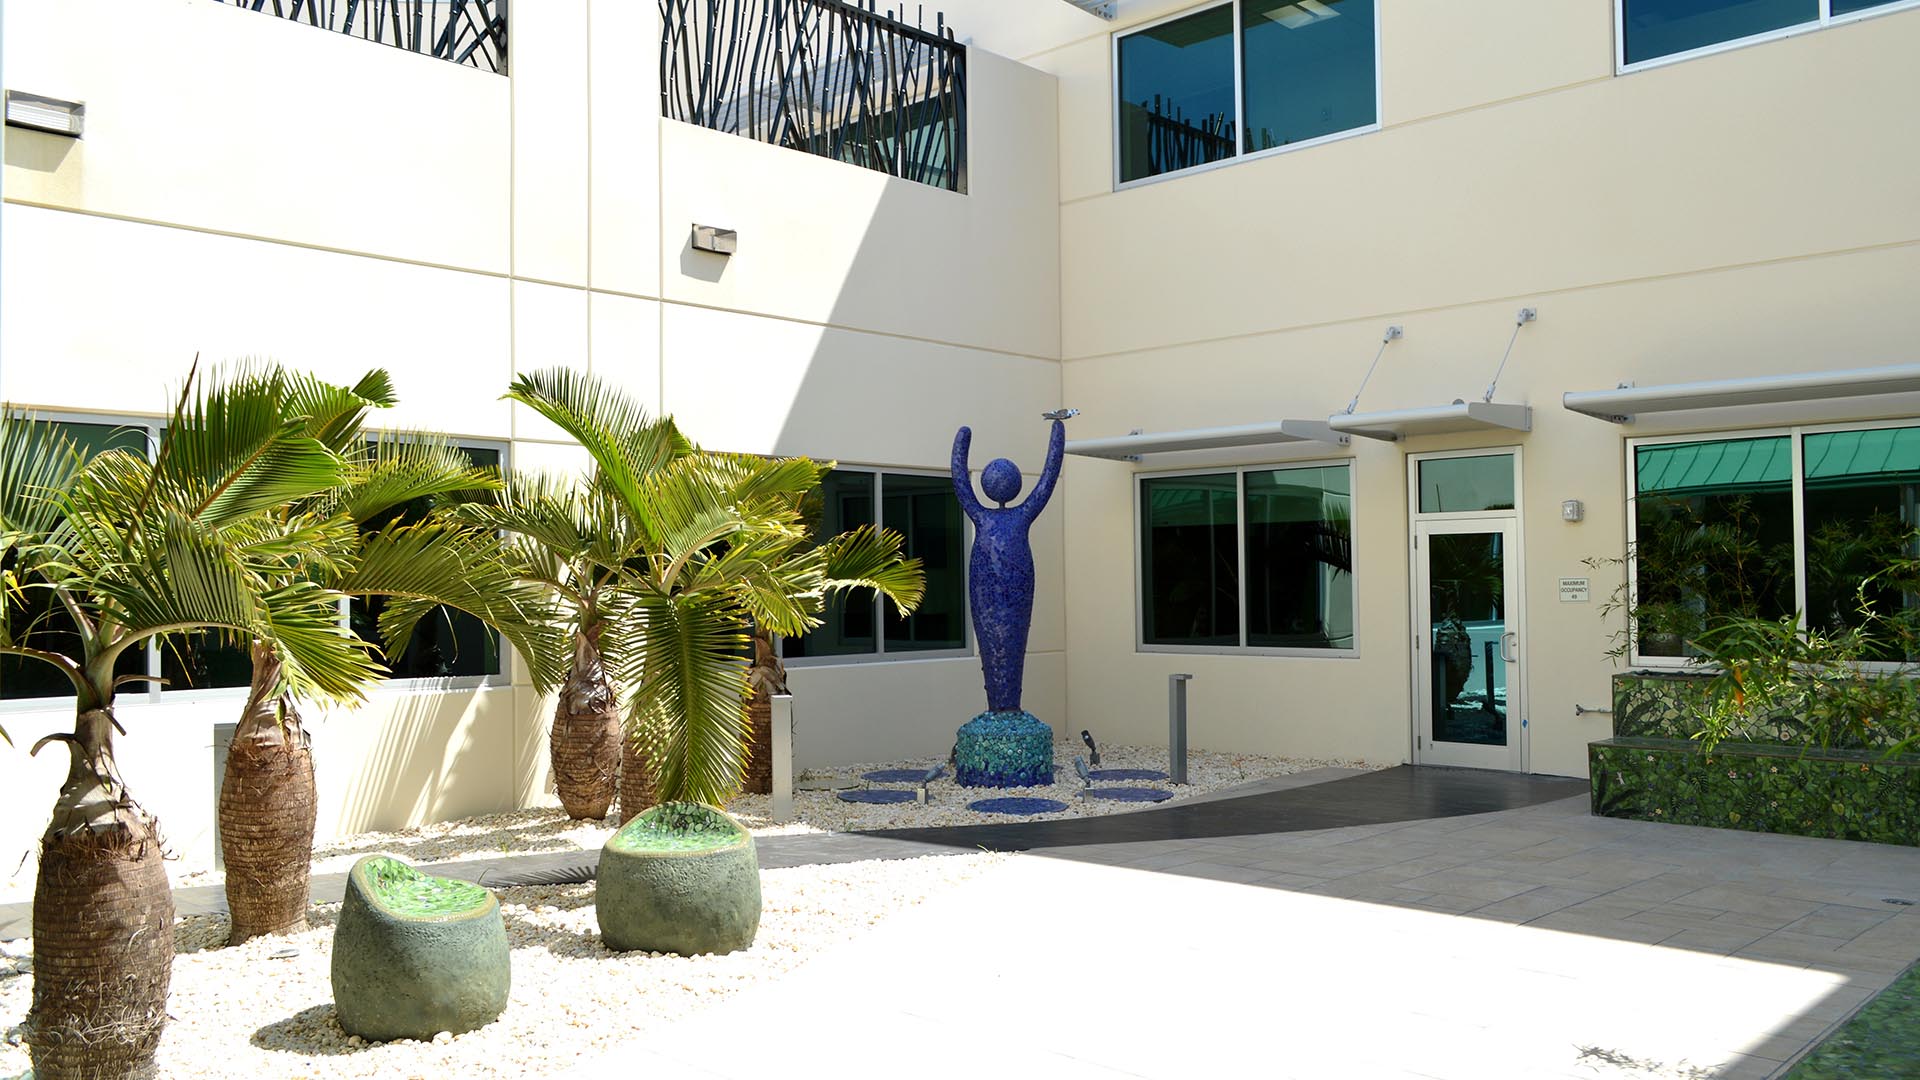 Photo of sculpture art in the BARC courtyard